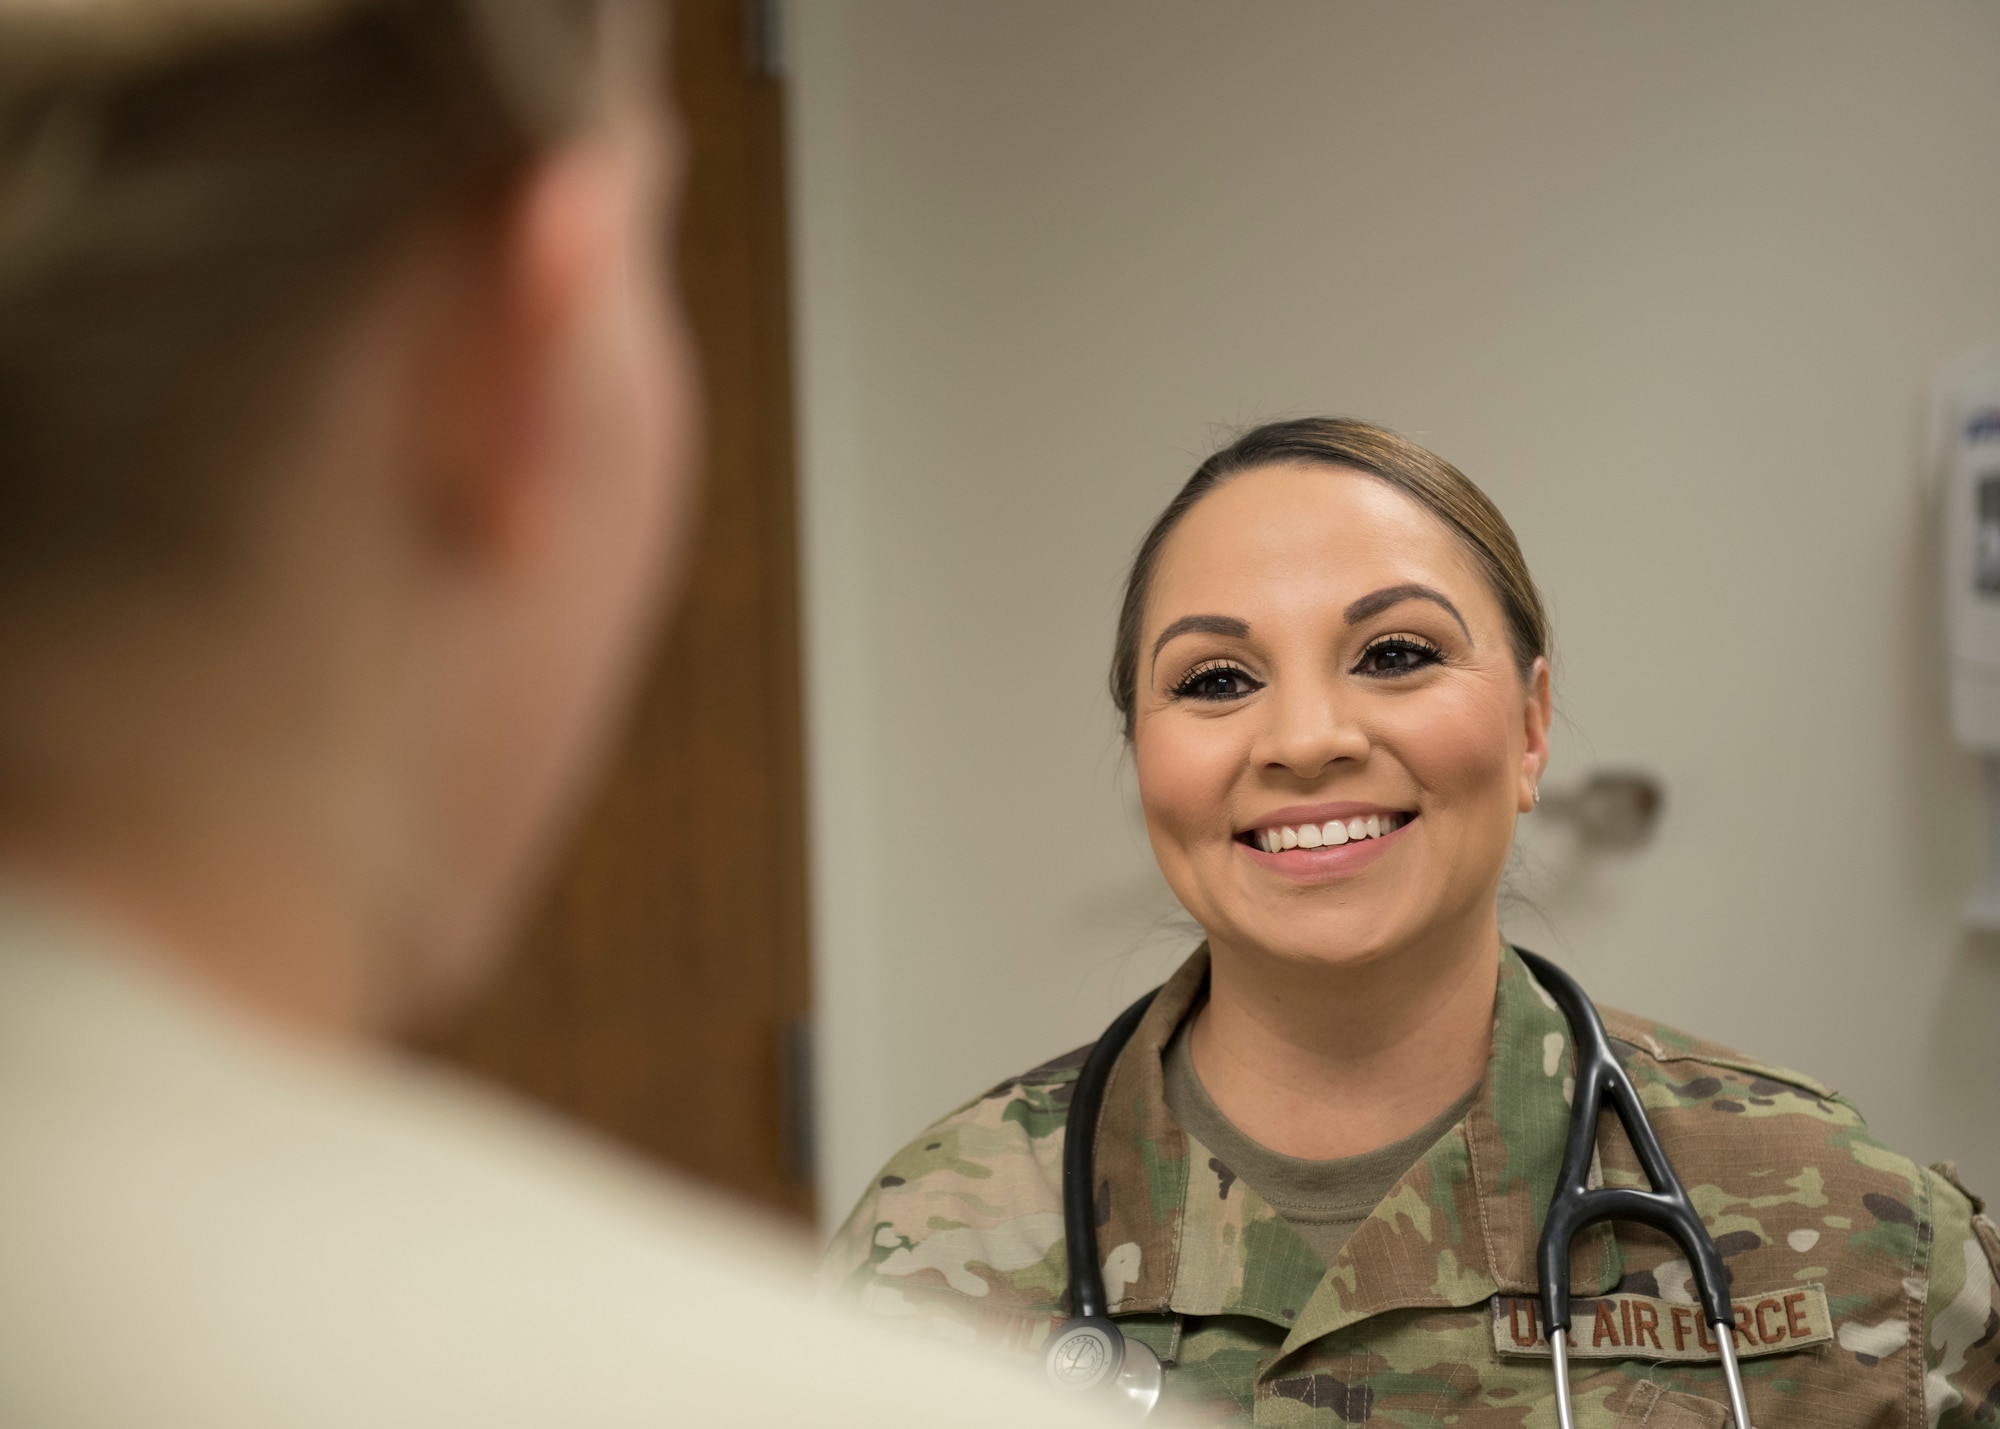 Tech. Sgt. Jerrica Wild, 21st Operational Medical Readiness Squadron independent duty medical technician, speaks to a patient at the clinic on Peterson Air Force Base, Colorado, September 25, 2019. Wild is also stationed at Cheyenne Mountain Air Force Station and provides care to the personnel there, alleviating the pressure of manning resources by patients not having to travel. (U.S. Air Force photo by Airman Alexis Christian)